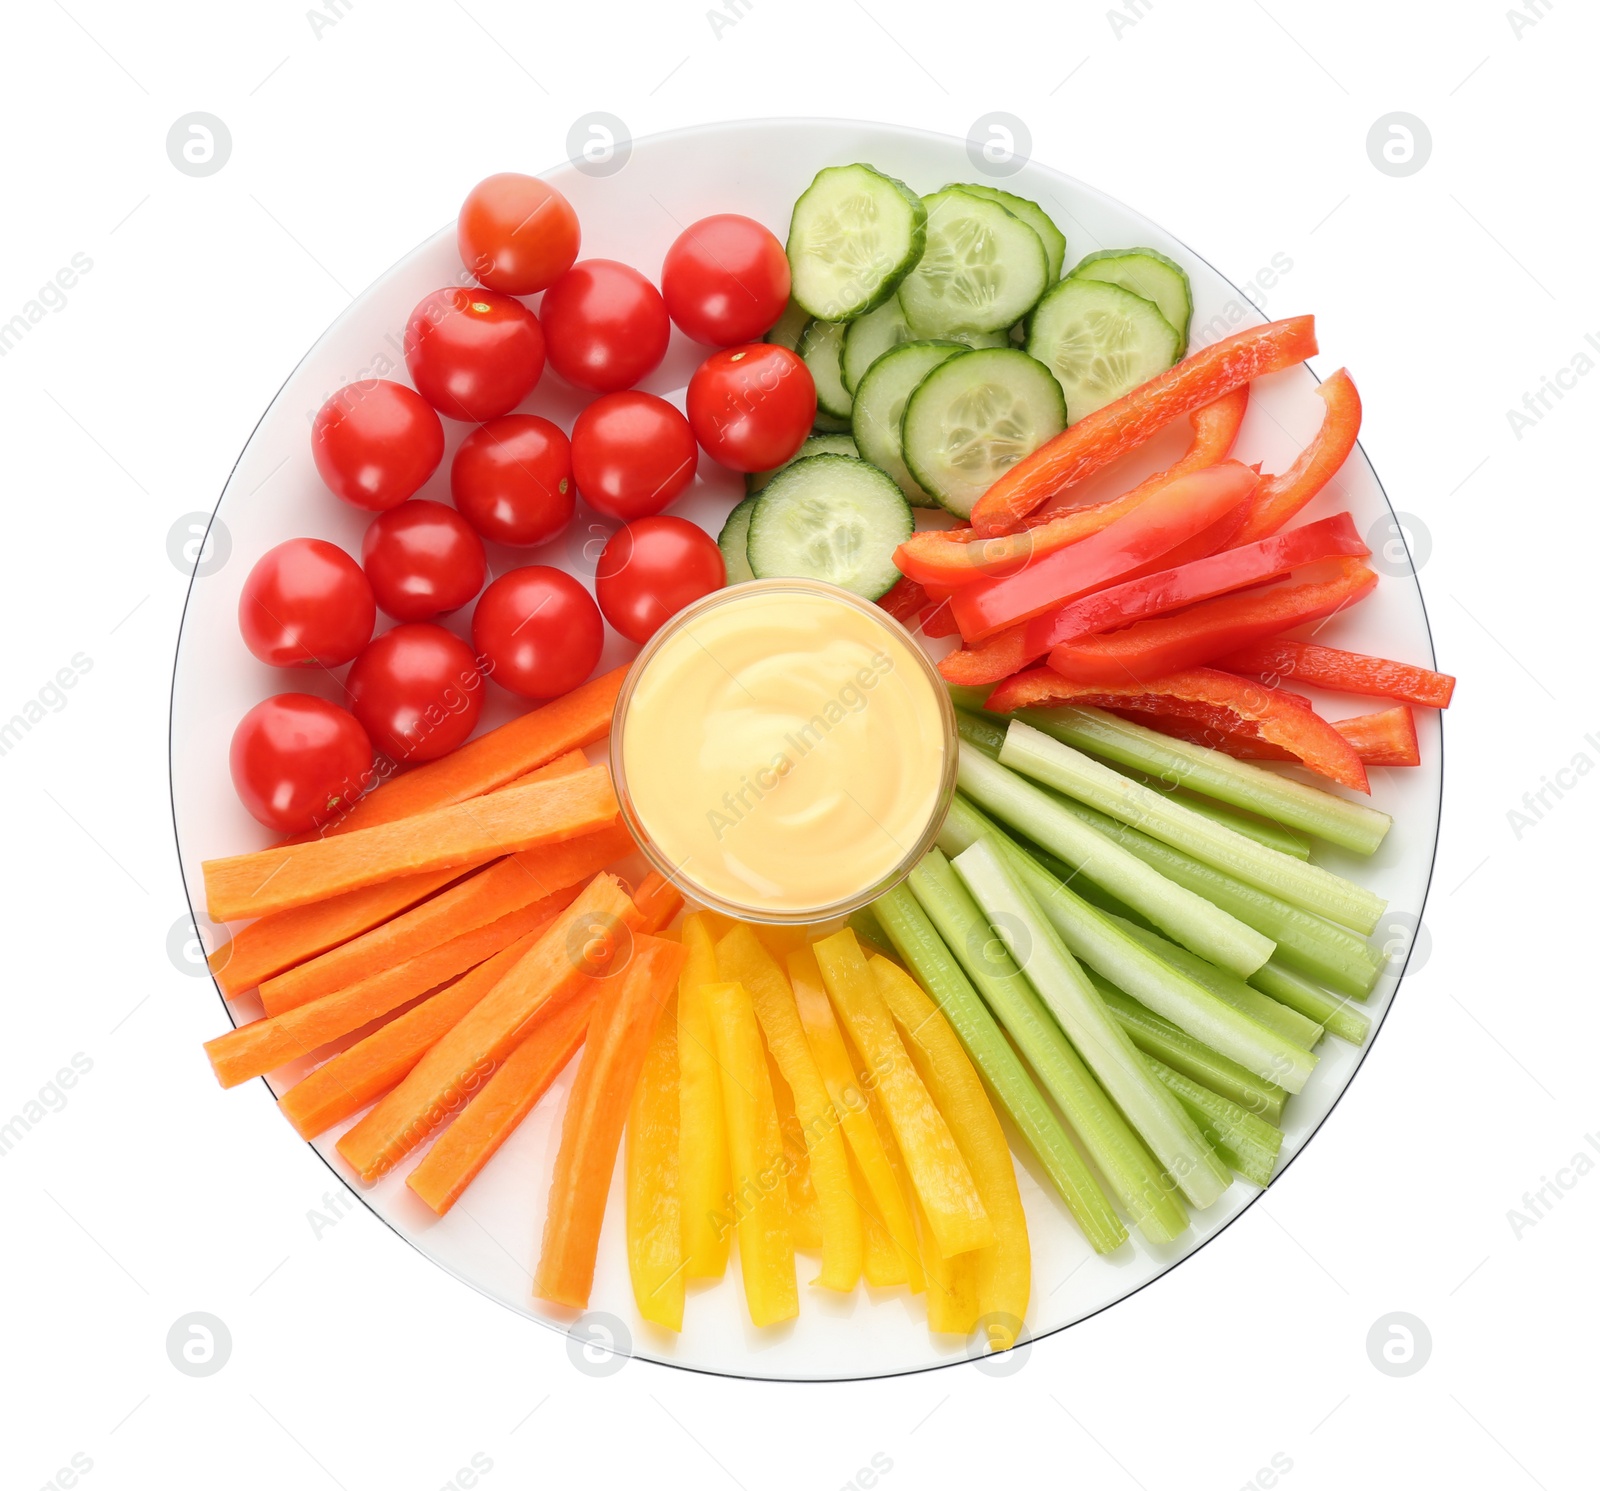 Photo of Plate with celery sticks, other vegetables and dip sauce isolated on white, top view